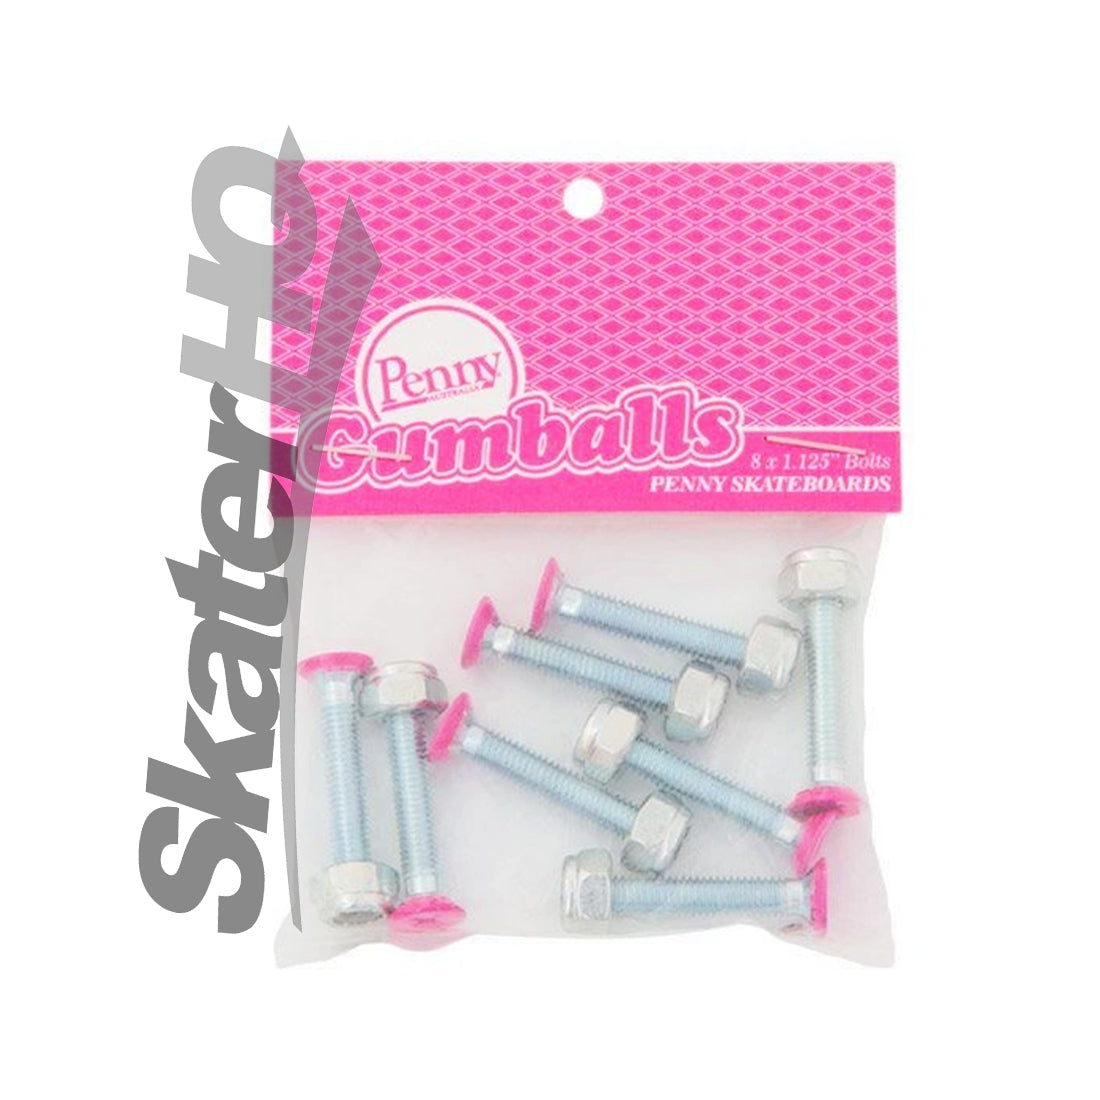 Penny Gumball 1.125 Bolts - Pink Skateboard Hardware and Parts